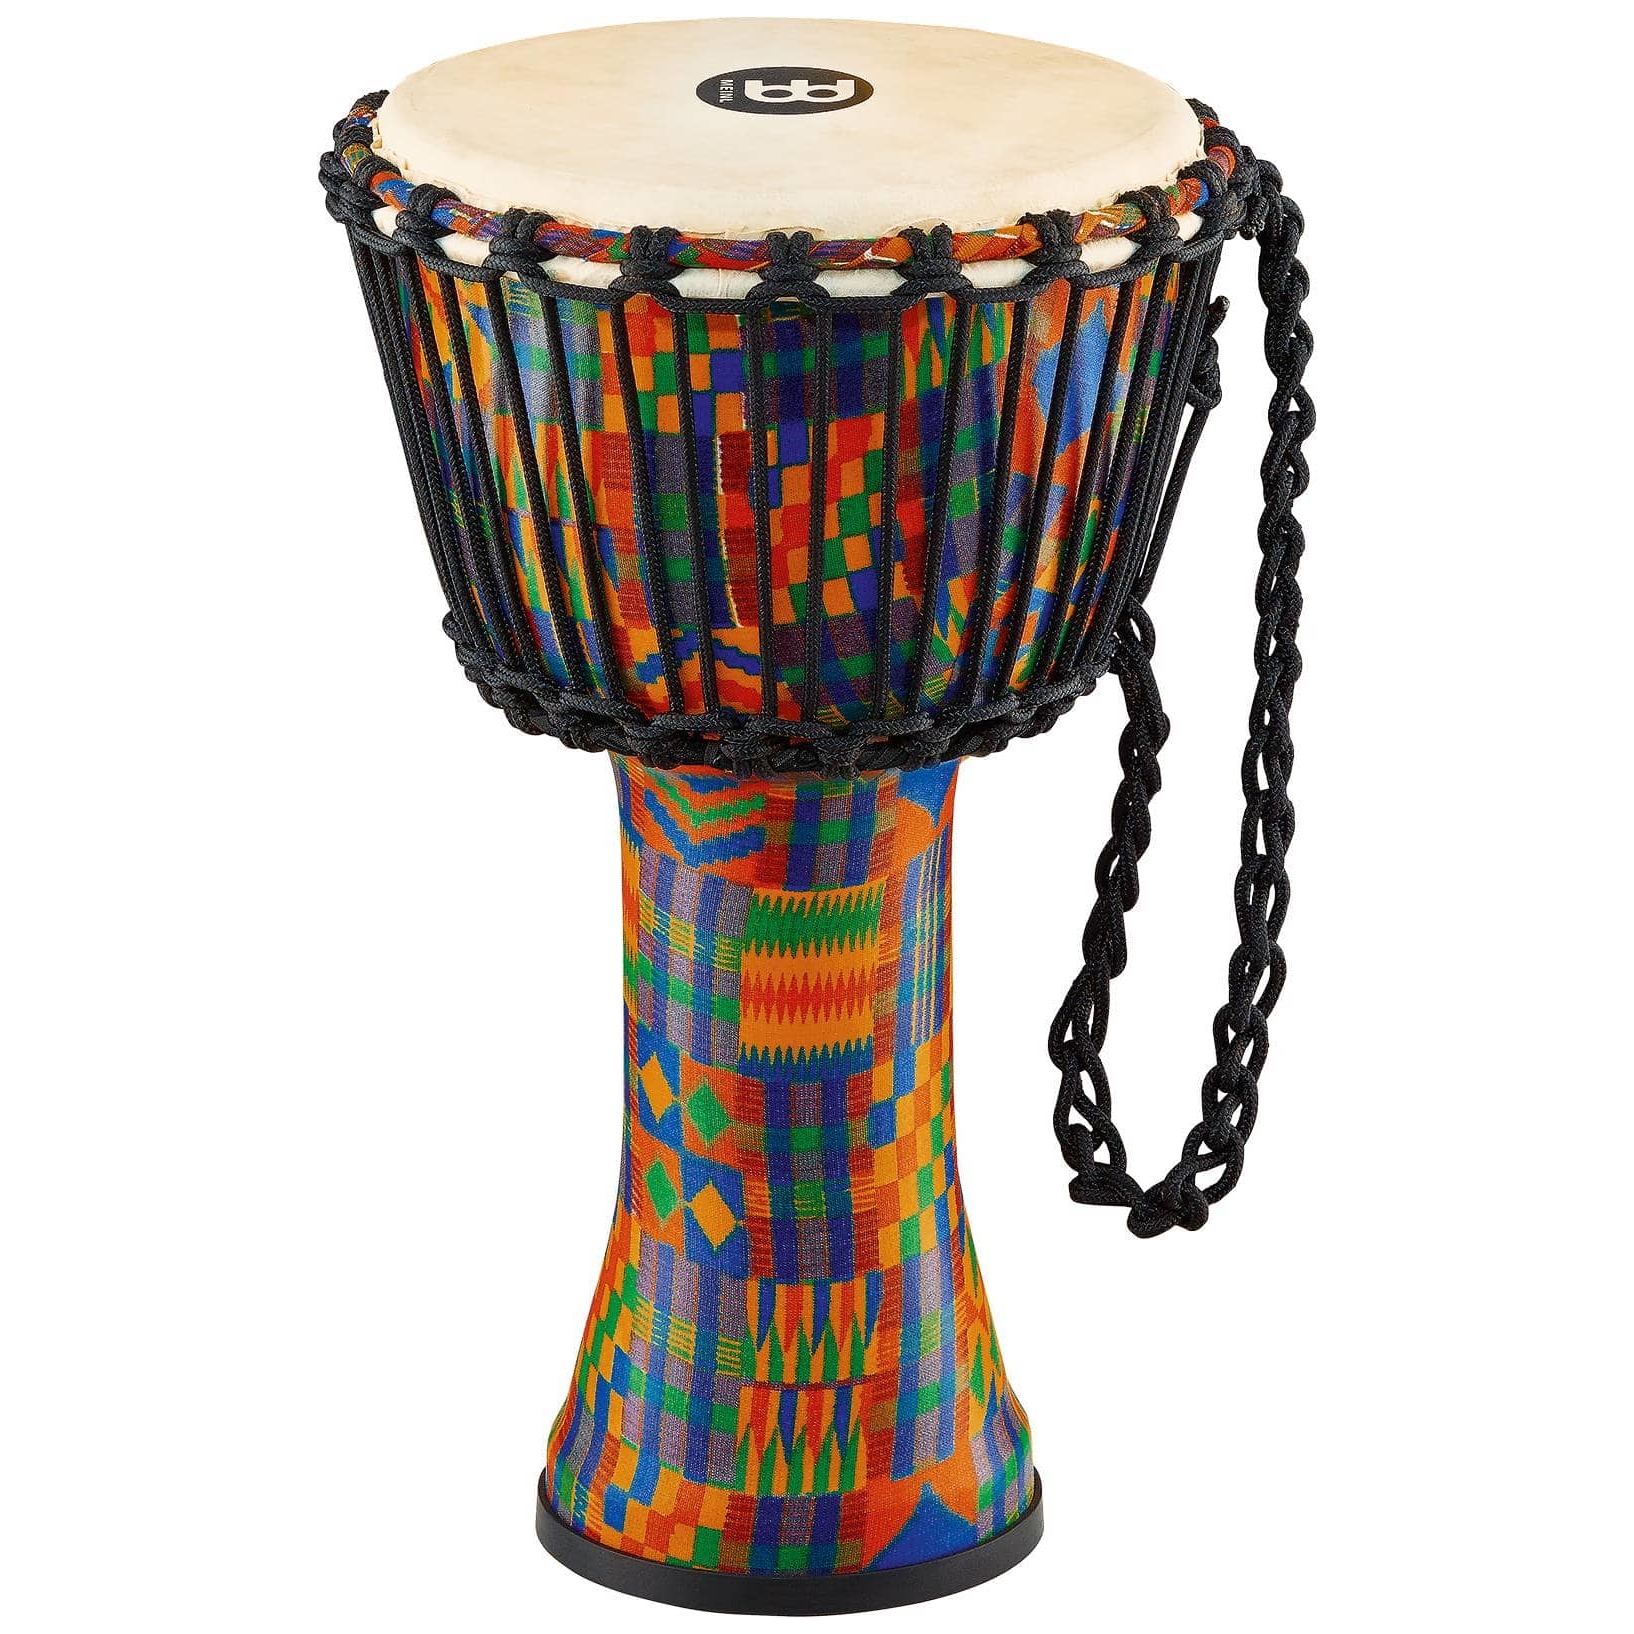 Meinl Percussion PADJ2-S-G - 8" Rope Tuned Travel Series Djembes, Goat Skin Head (Patented), Kenyan Quilt